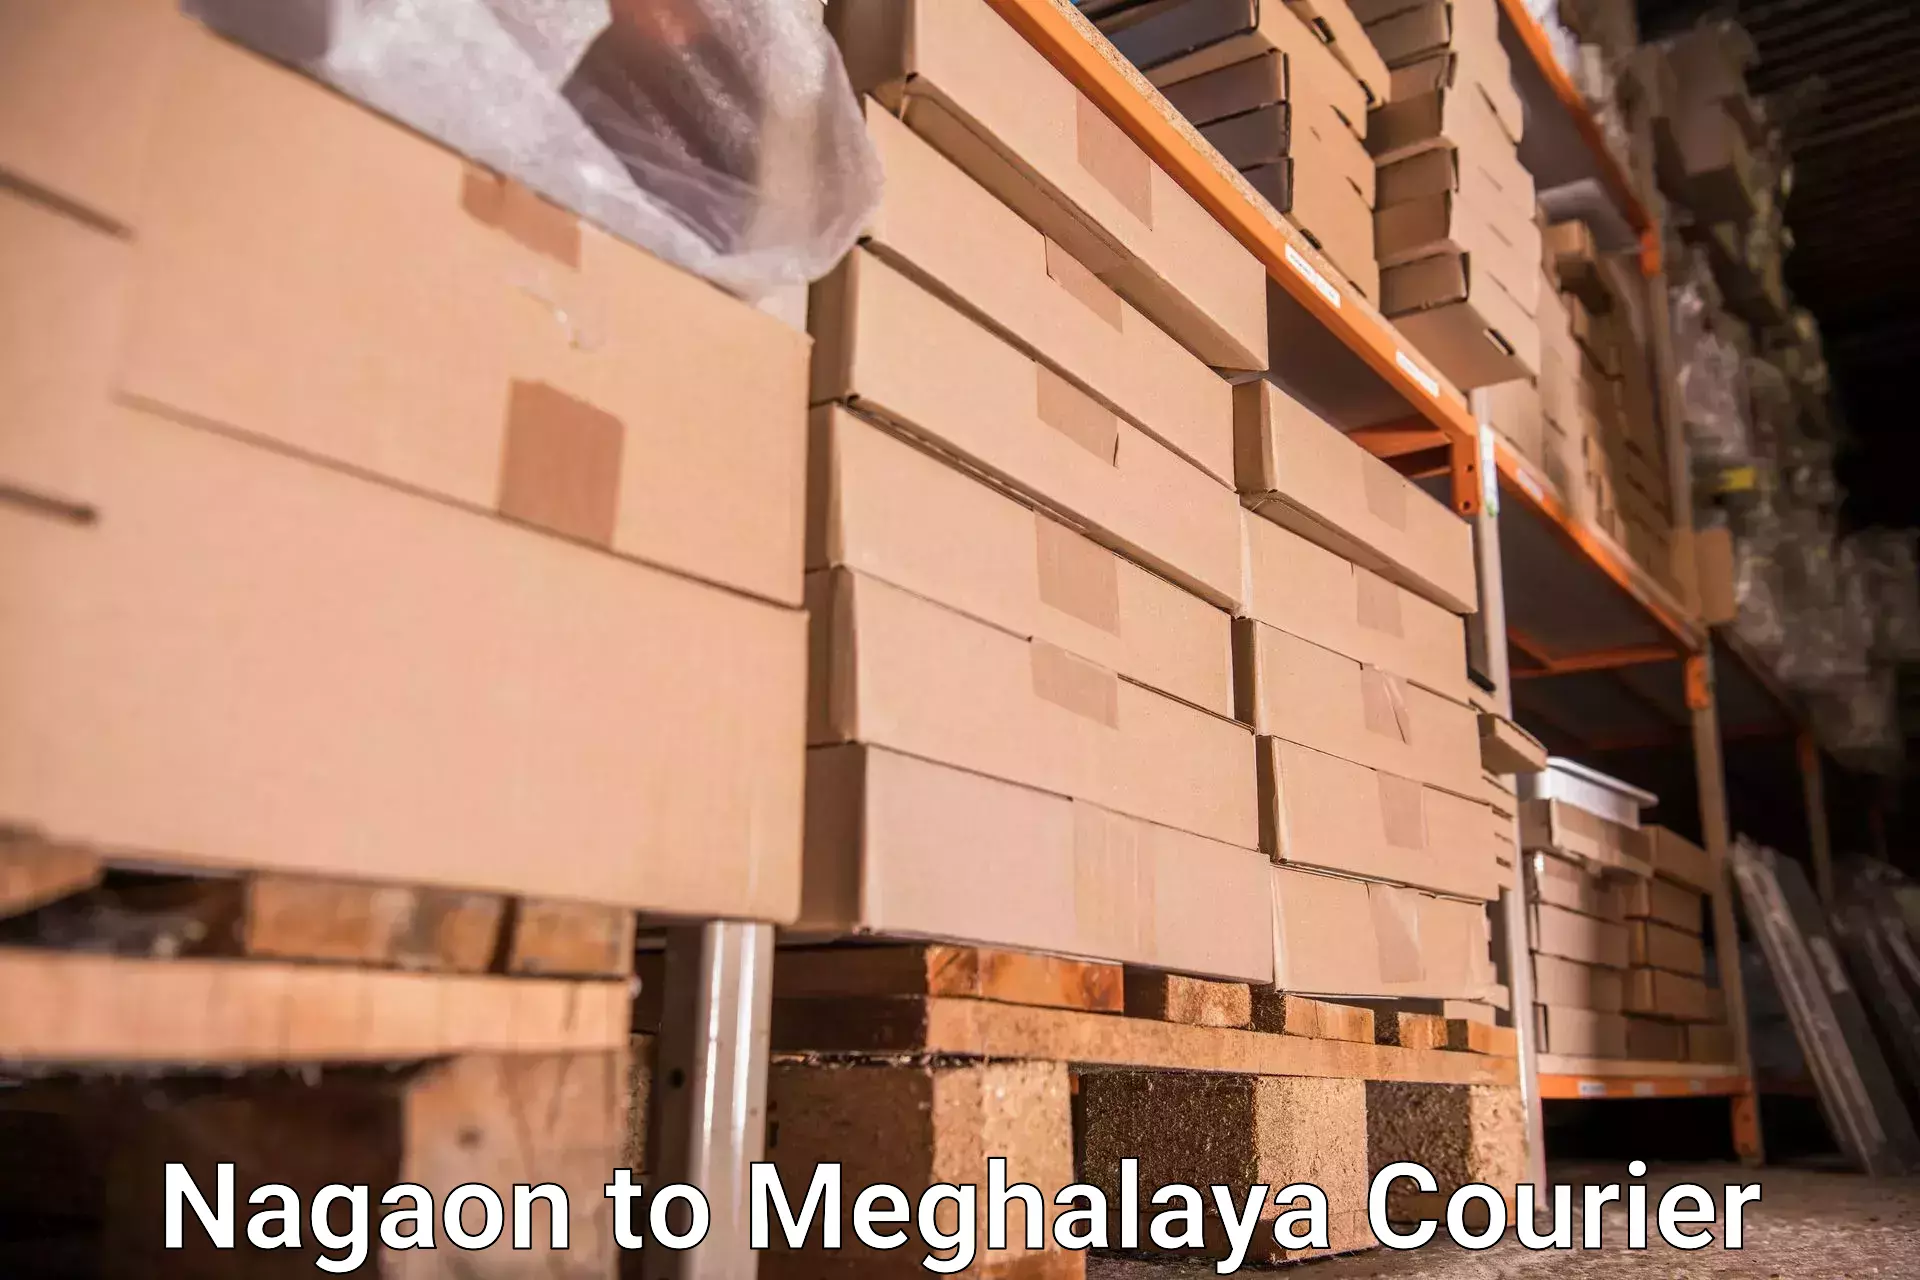 Personal effects shipping in Nagaon to Meghalaya